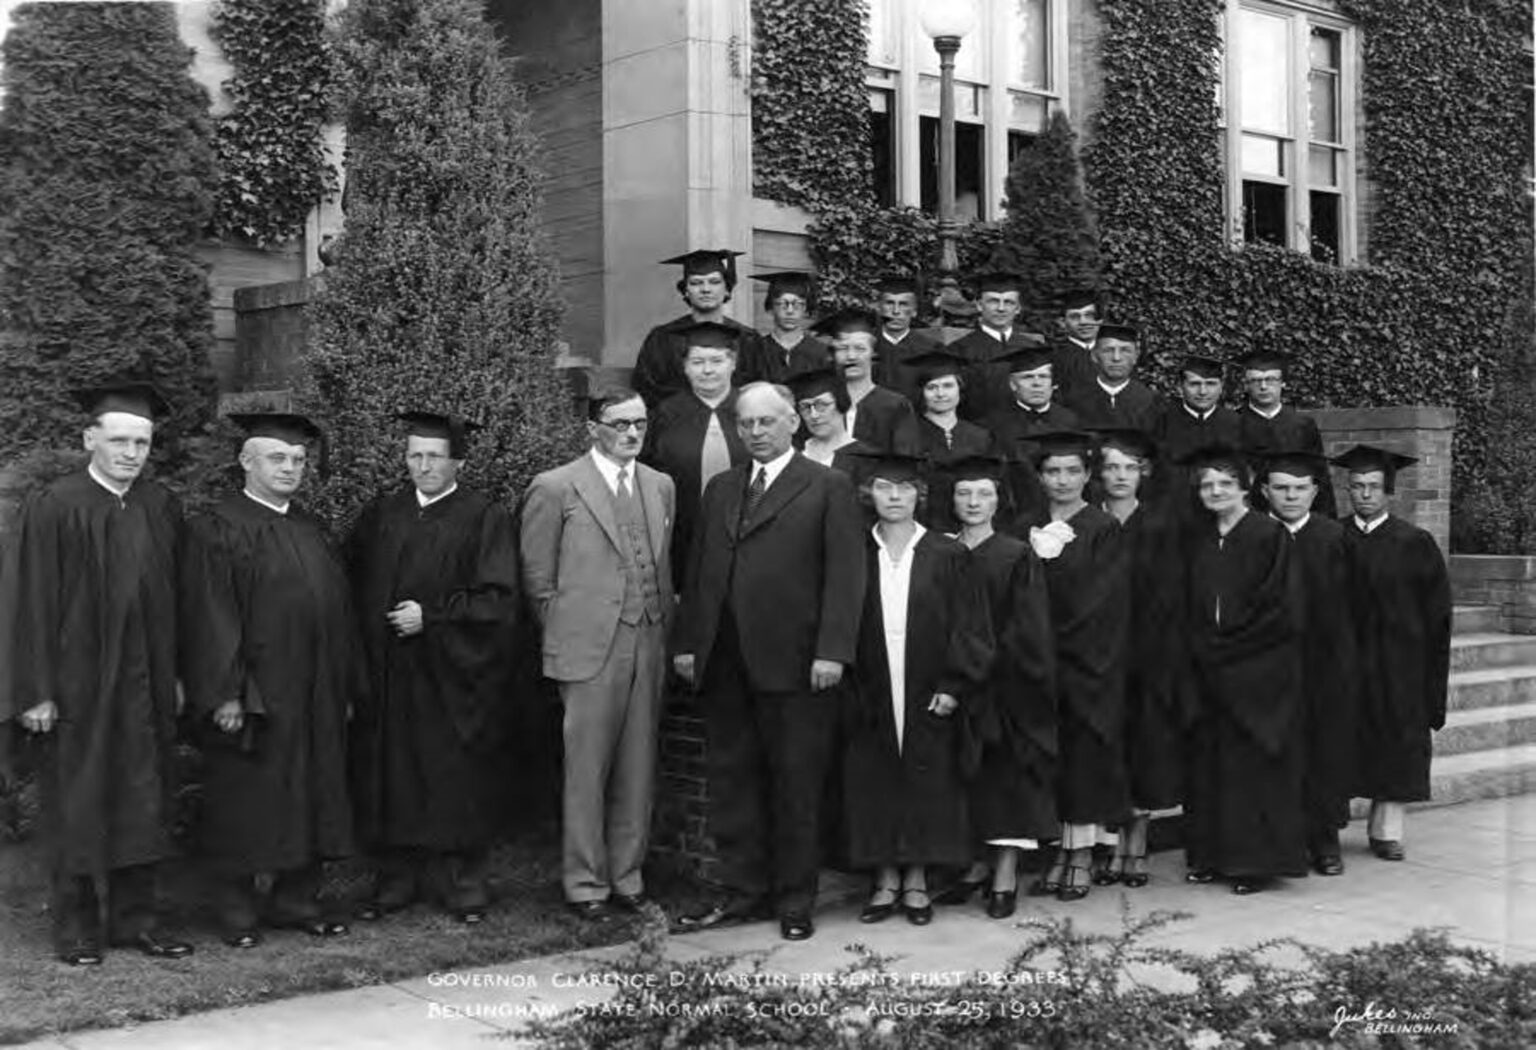 Western President Charles Fisher standing with the graduating class of 1933 in front of the campus.